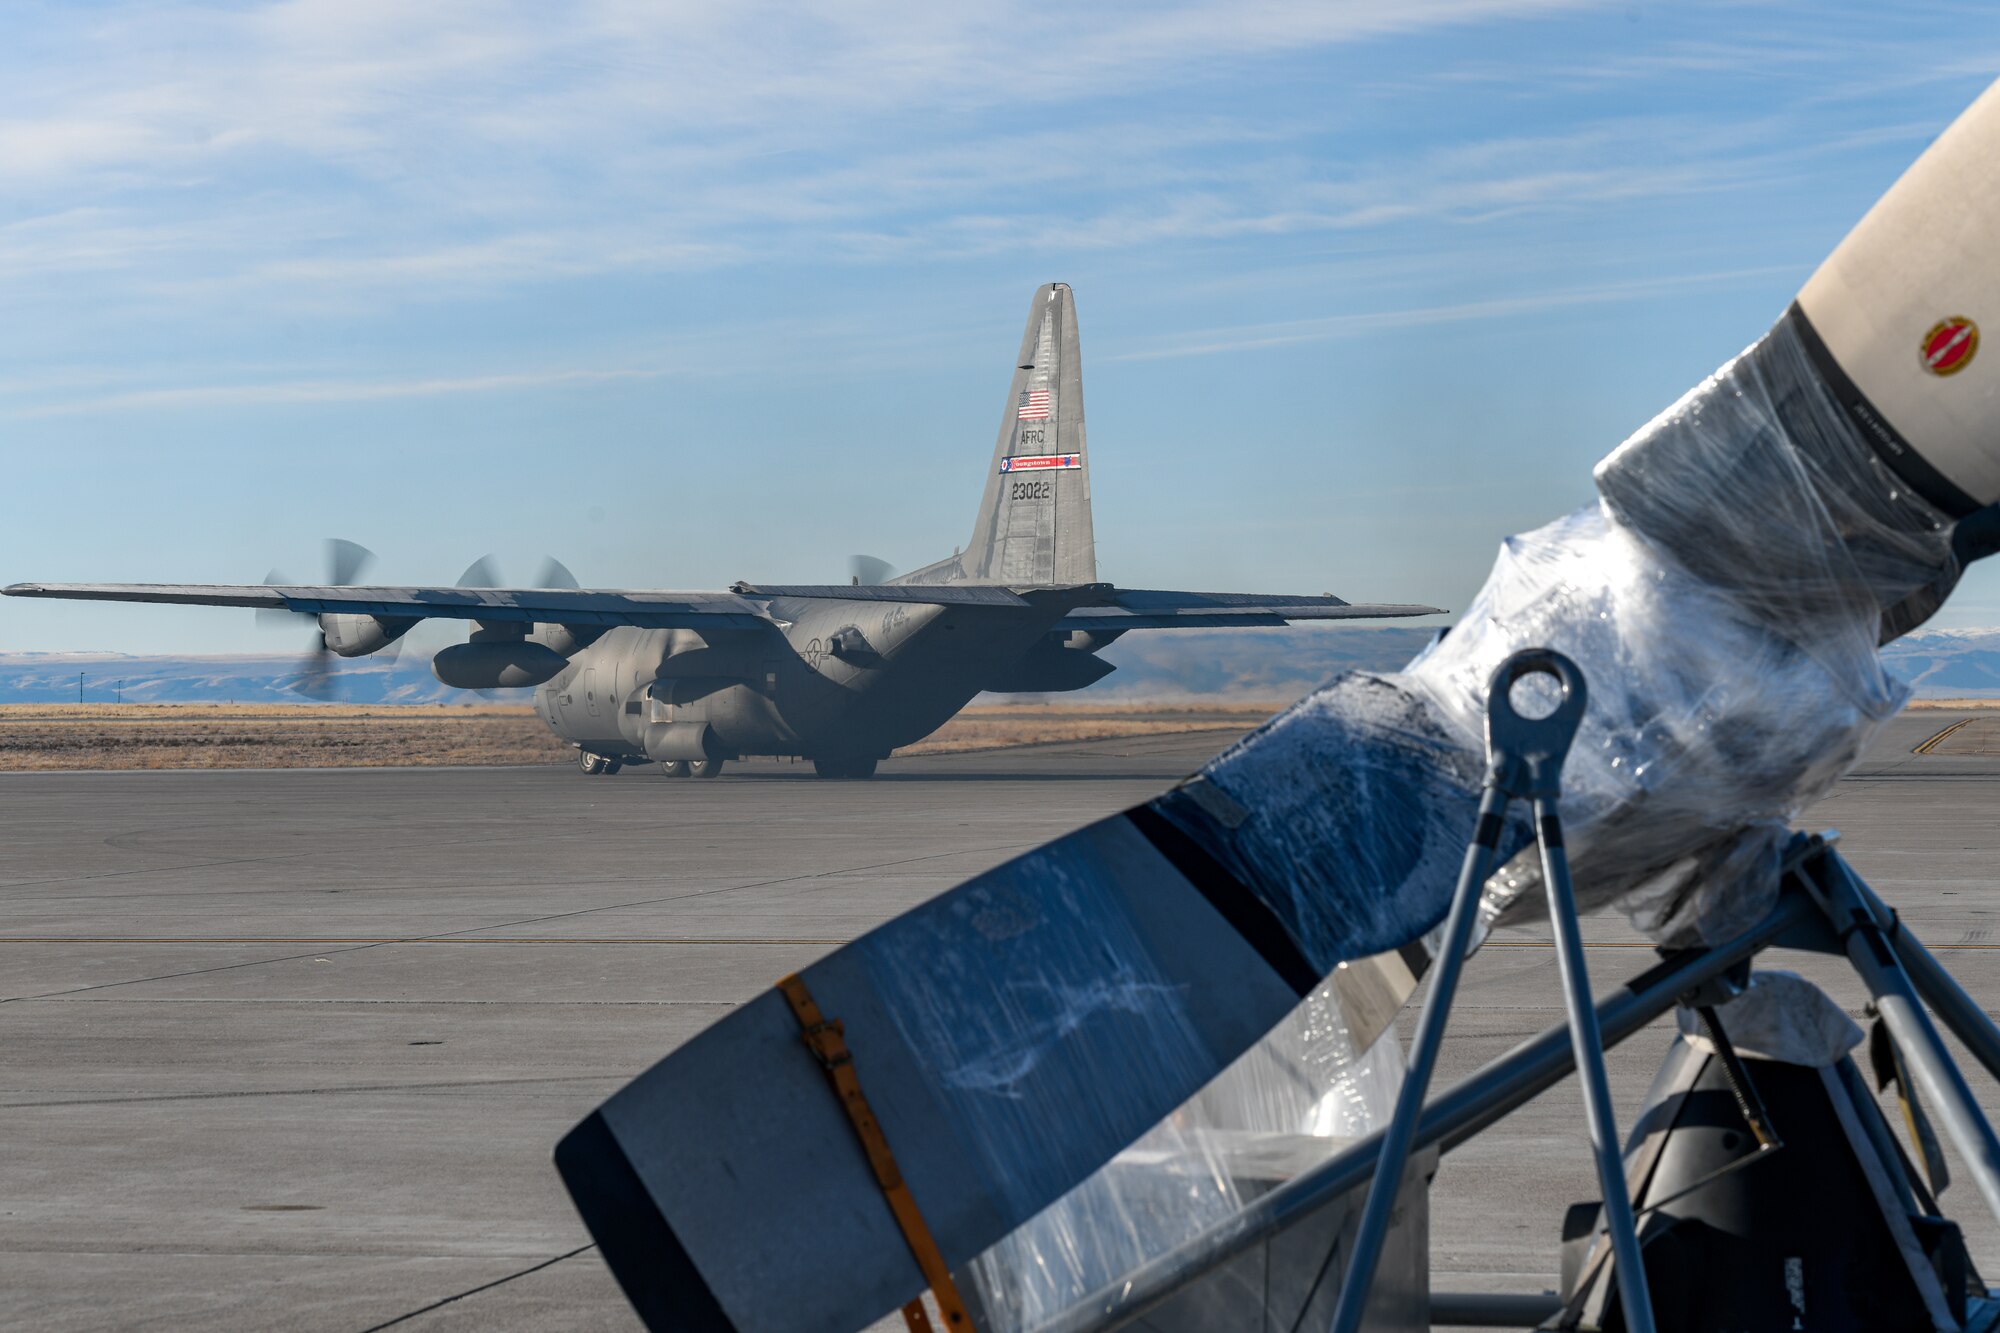 A 910th Airlift Wing C-130H Hercules aircraft taxis for takeoff, Jan. 18, 2023, at Mountain Home Air Force Base, Idaho.